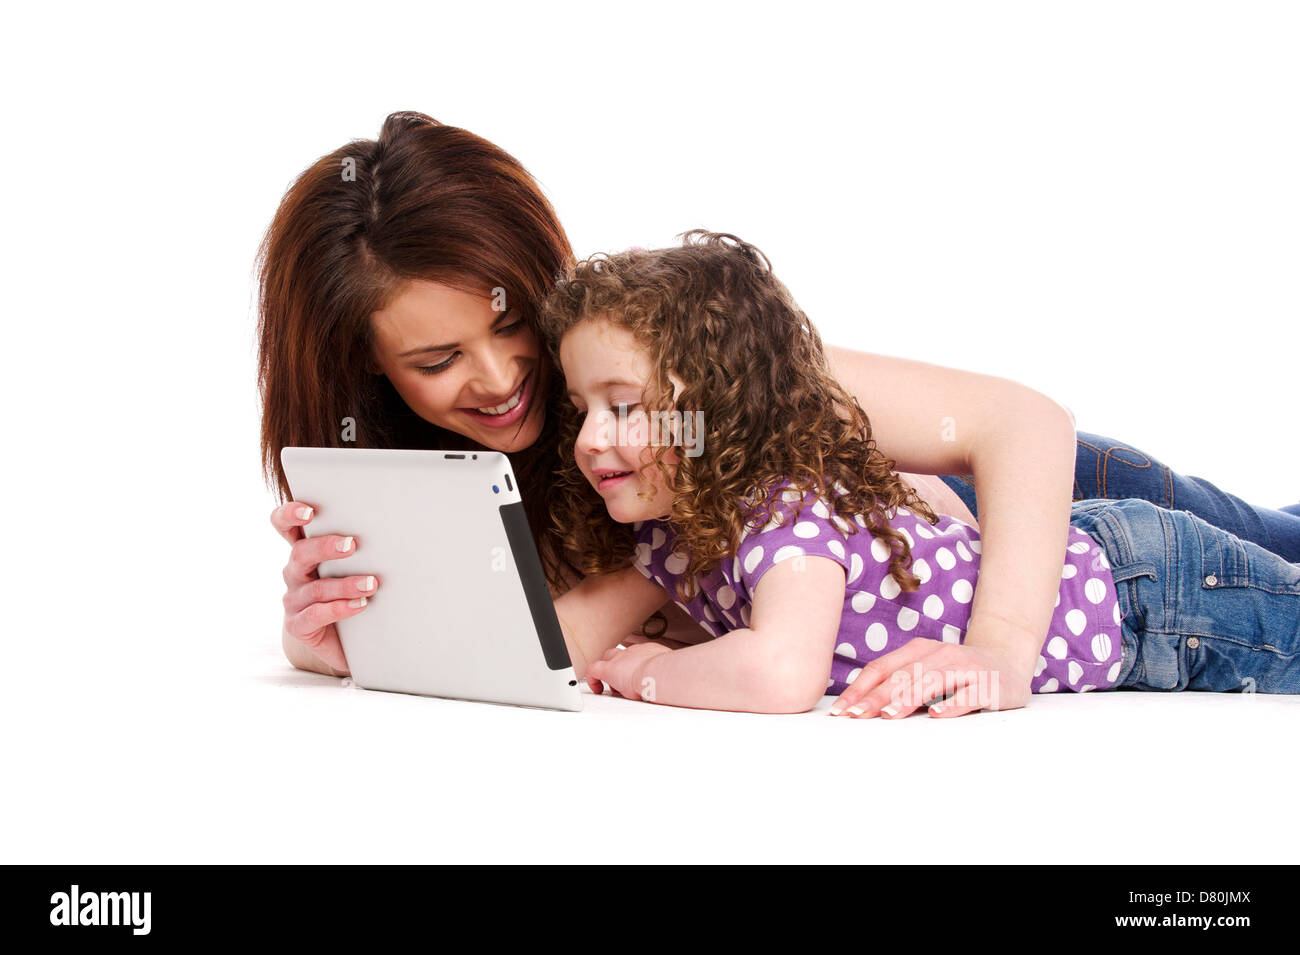 Mother sat with a little girl on her knee playing on a computer tablet isolated on a white background Stock Photo